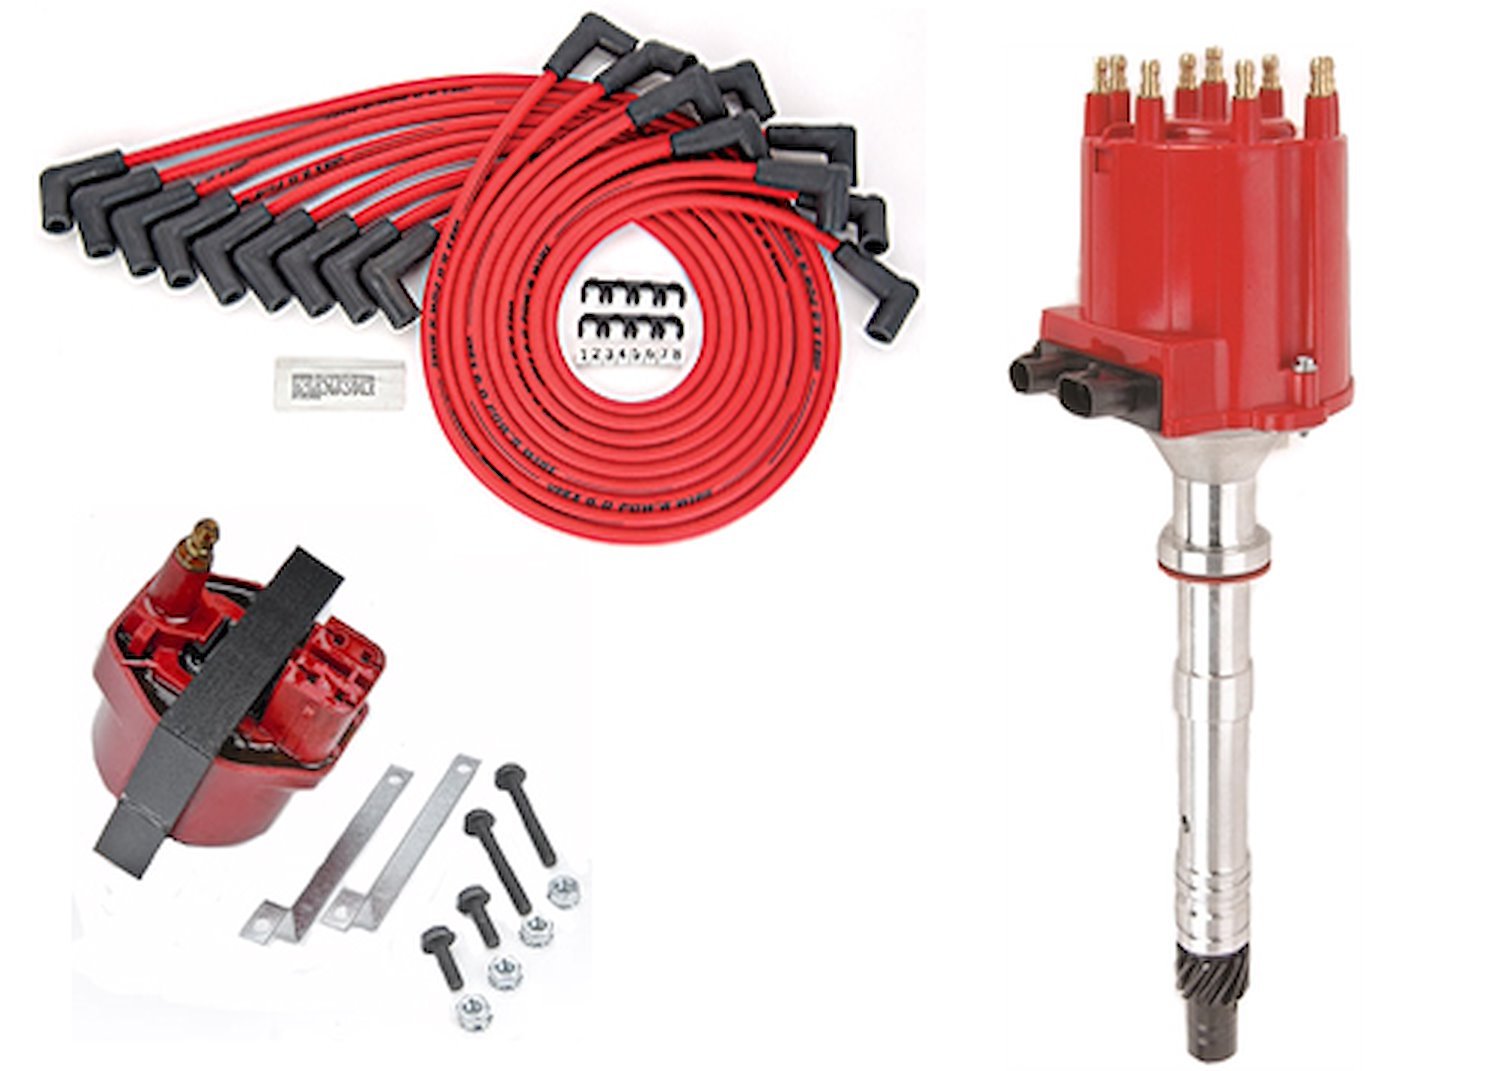 HEI Distributor, Spark Plug Wires and Coil Kit for 1985-1995 Chevy Truck with V8 Engine and External Coil